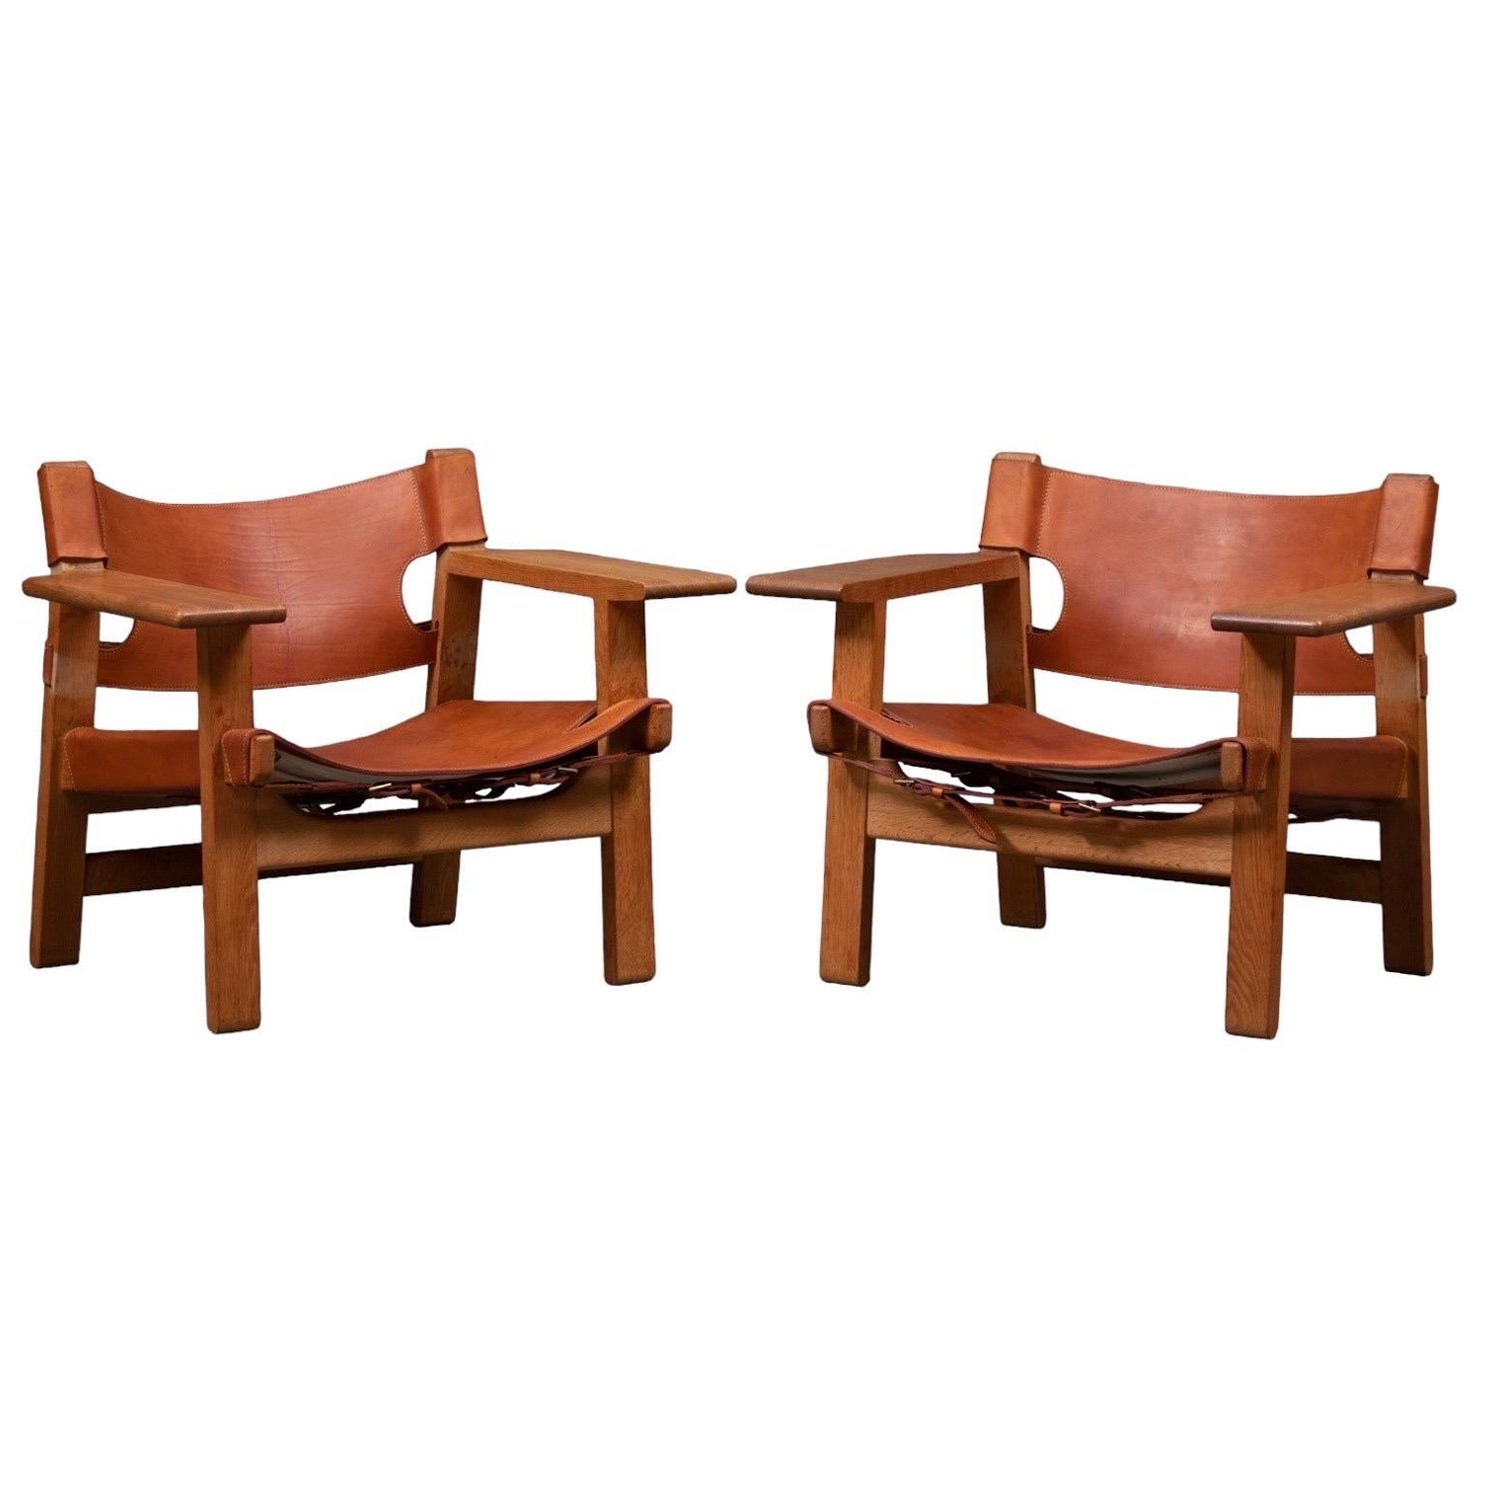 Pair of Spanish Chairs by Børge Mogensen, 1960s For Sale